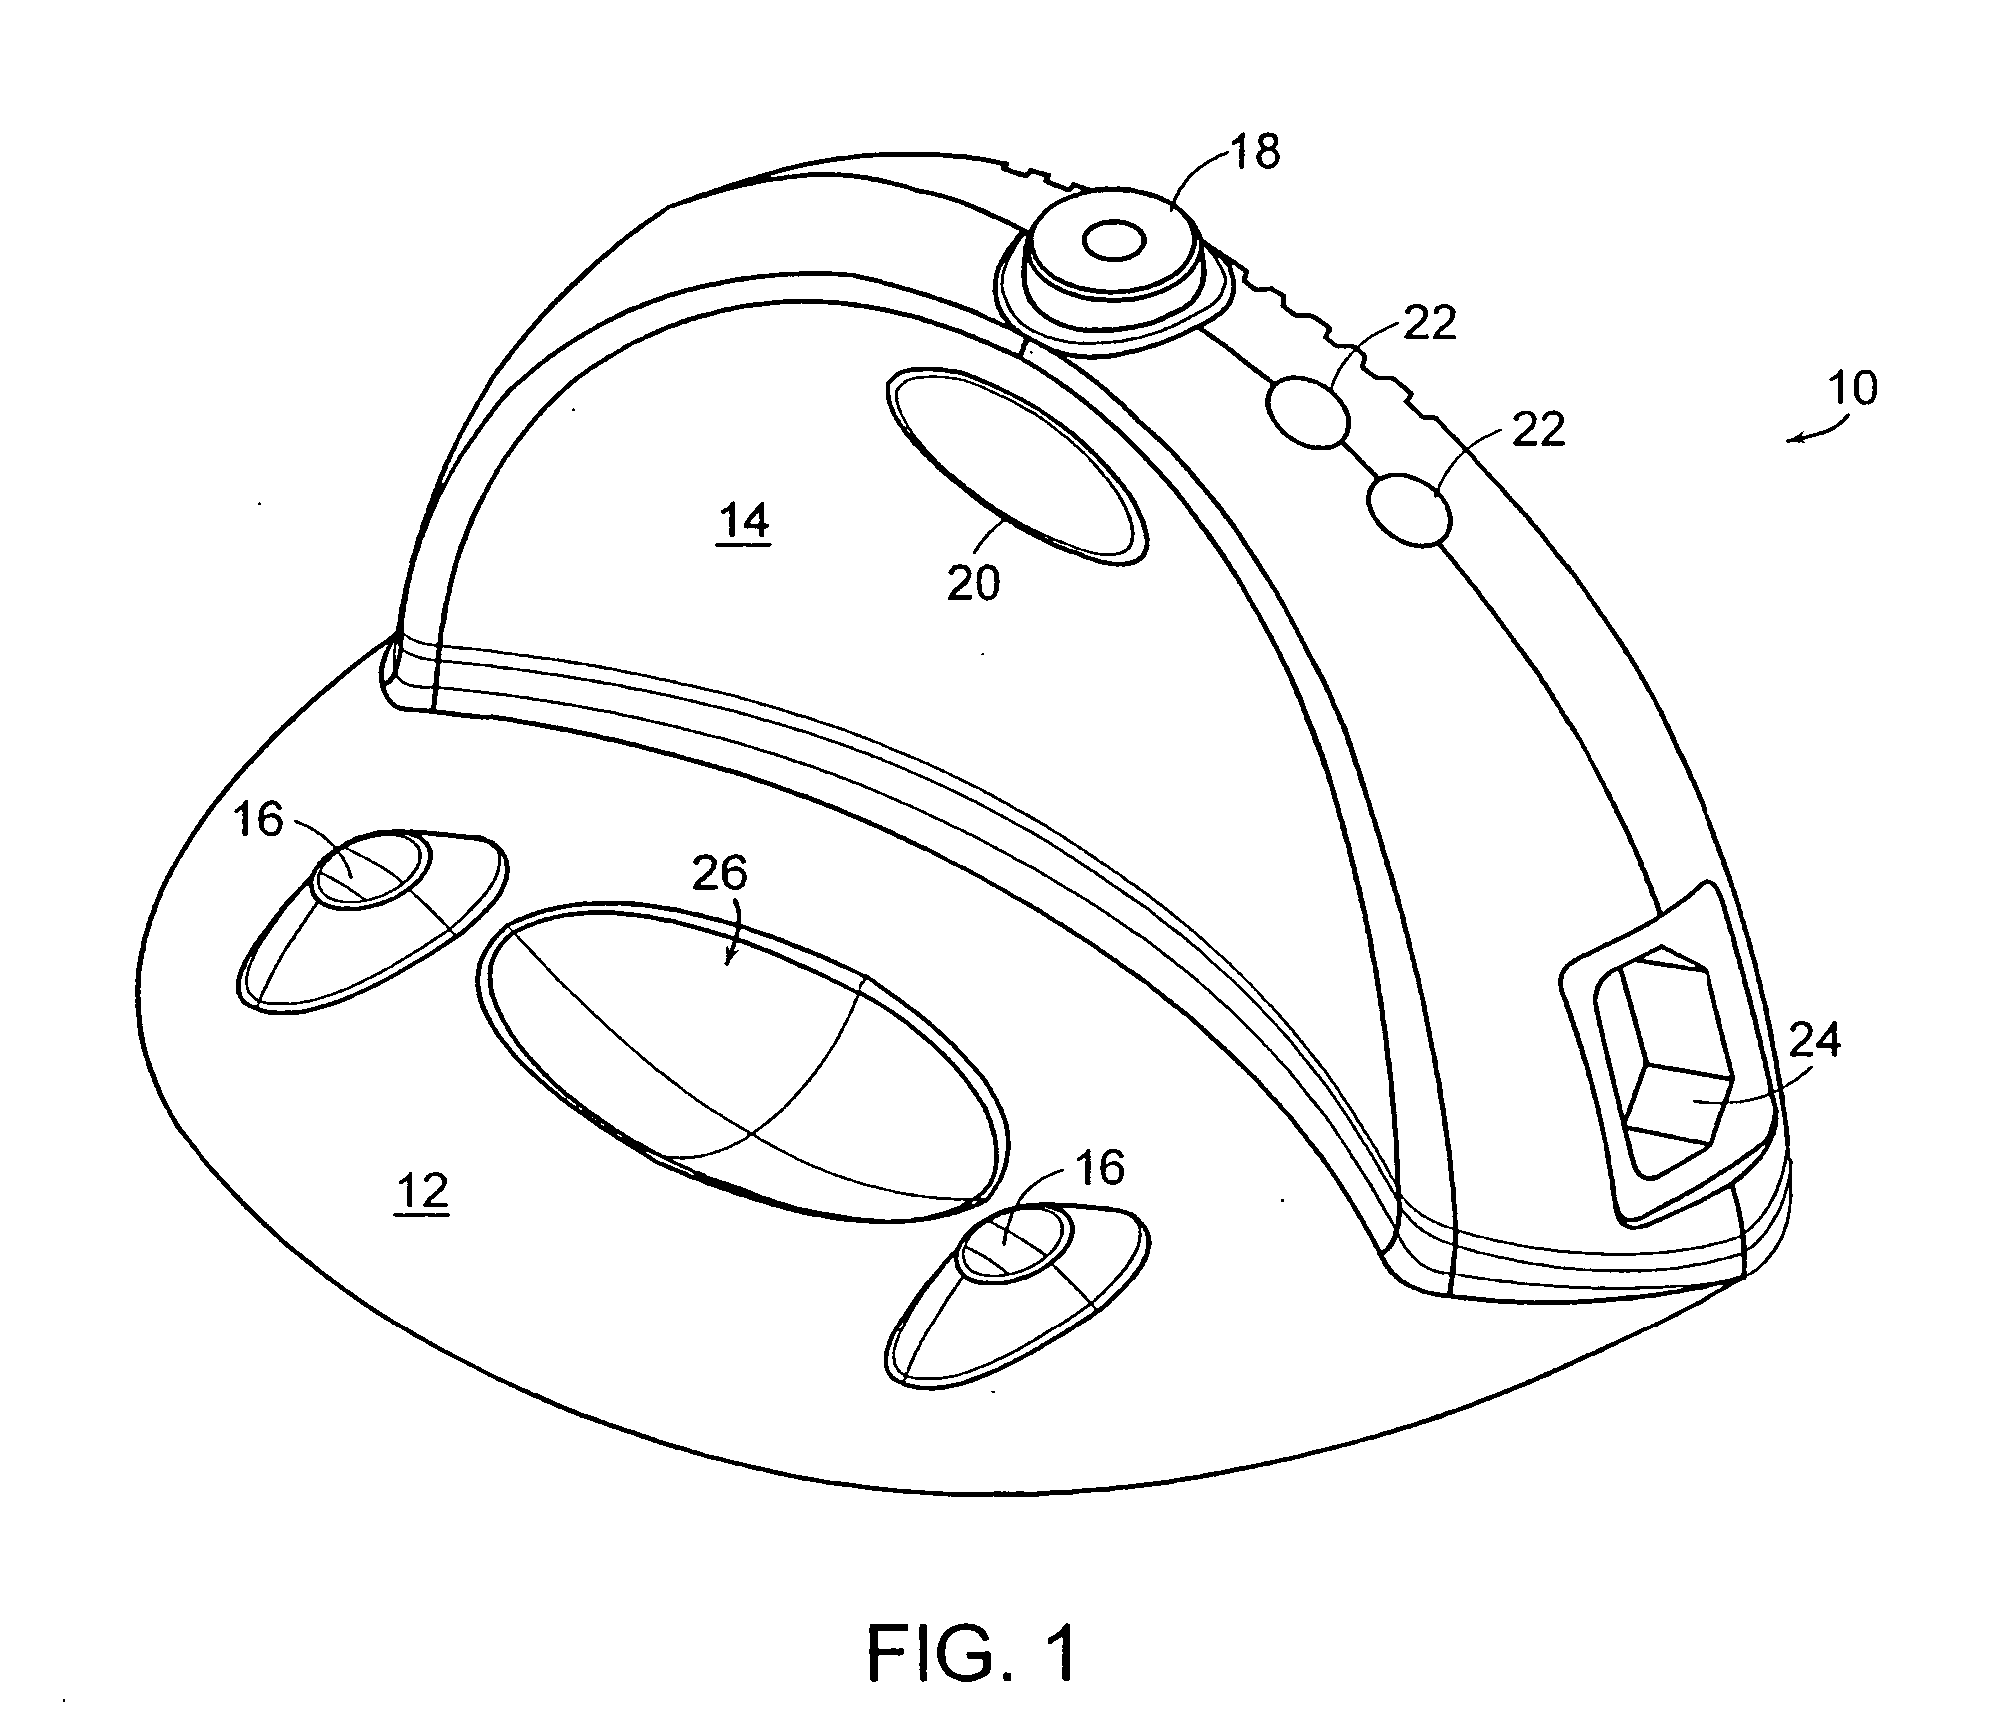 Autonomous robot auto-docking and energy management systems and methods